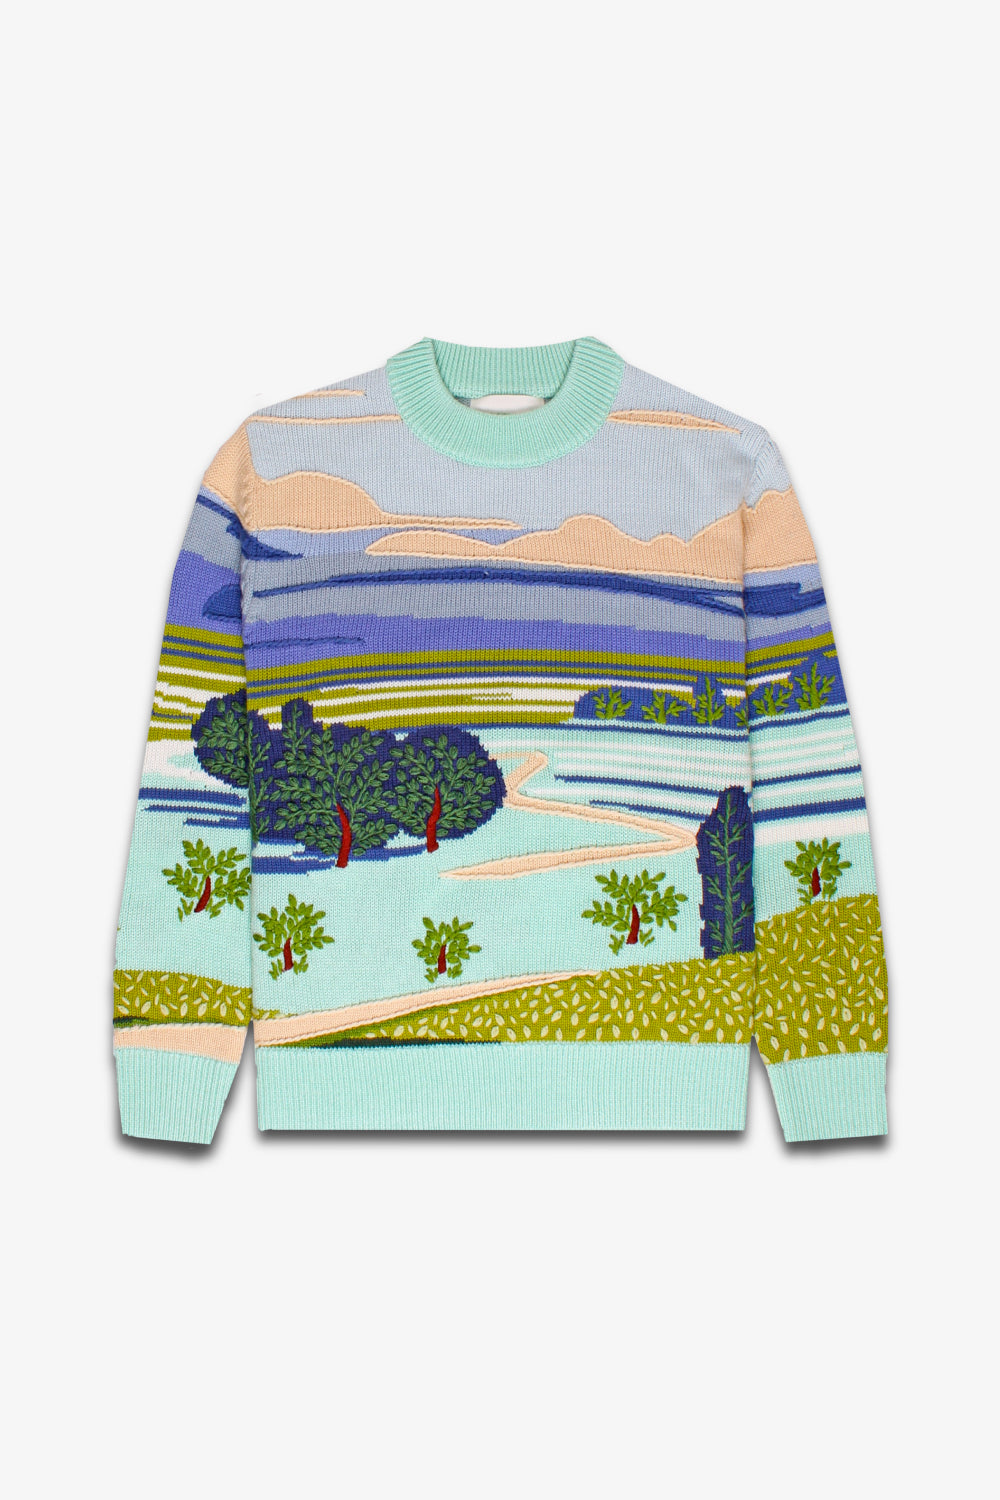 Spring Canyon Hand Embroidery Sweater